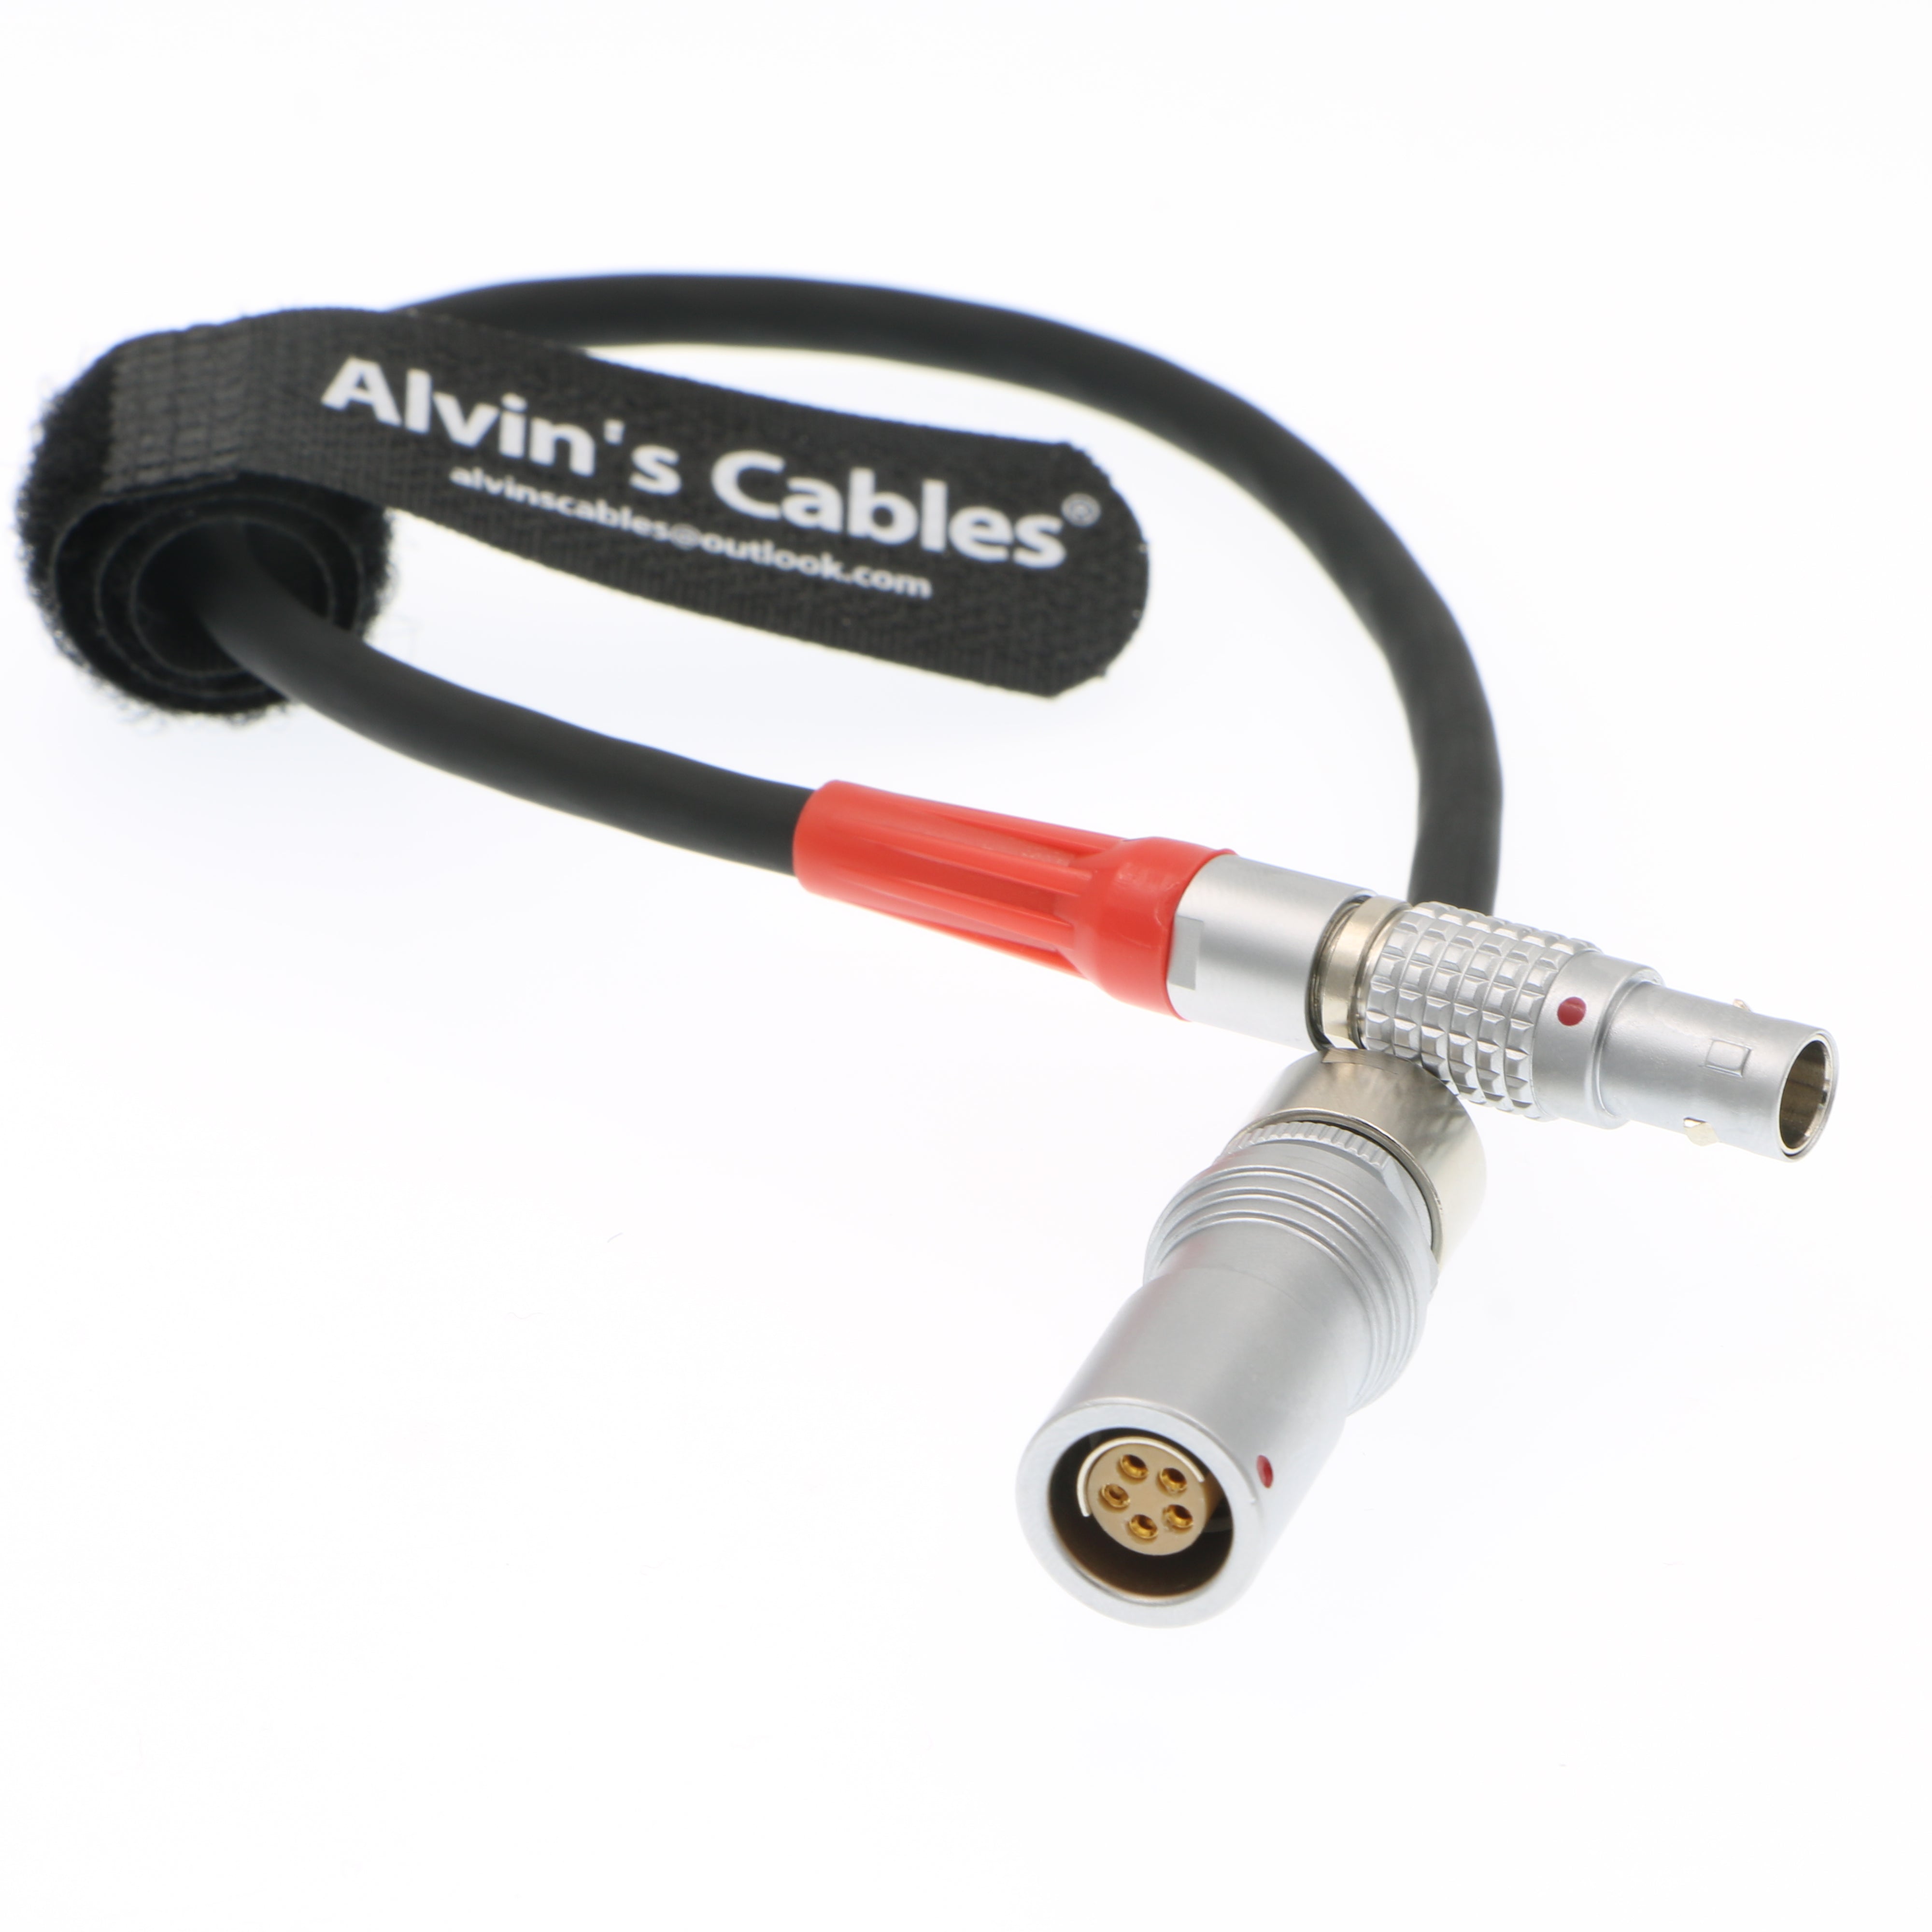 Alvin's Cables 4 Pin Male Cmotion LBUS to 5 Pin Female LCS Cable for Arri Lens Control System